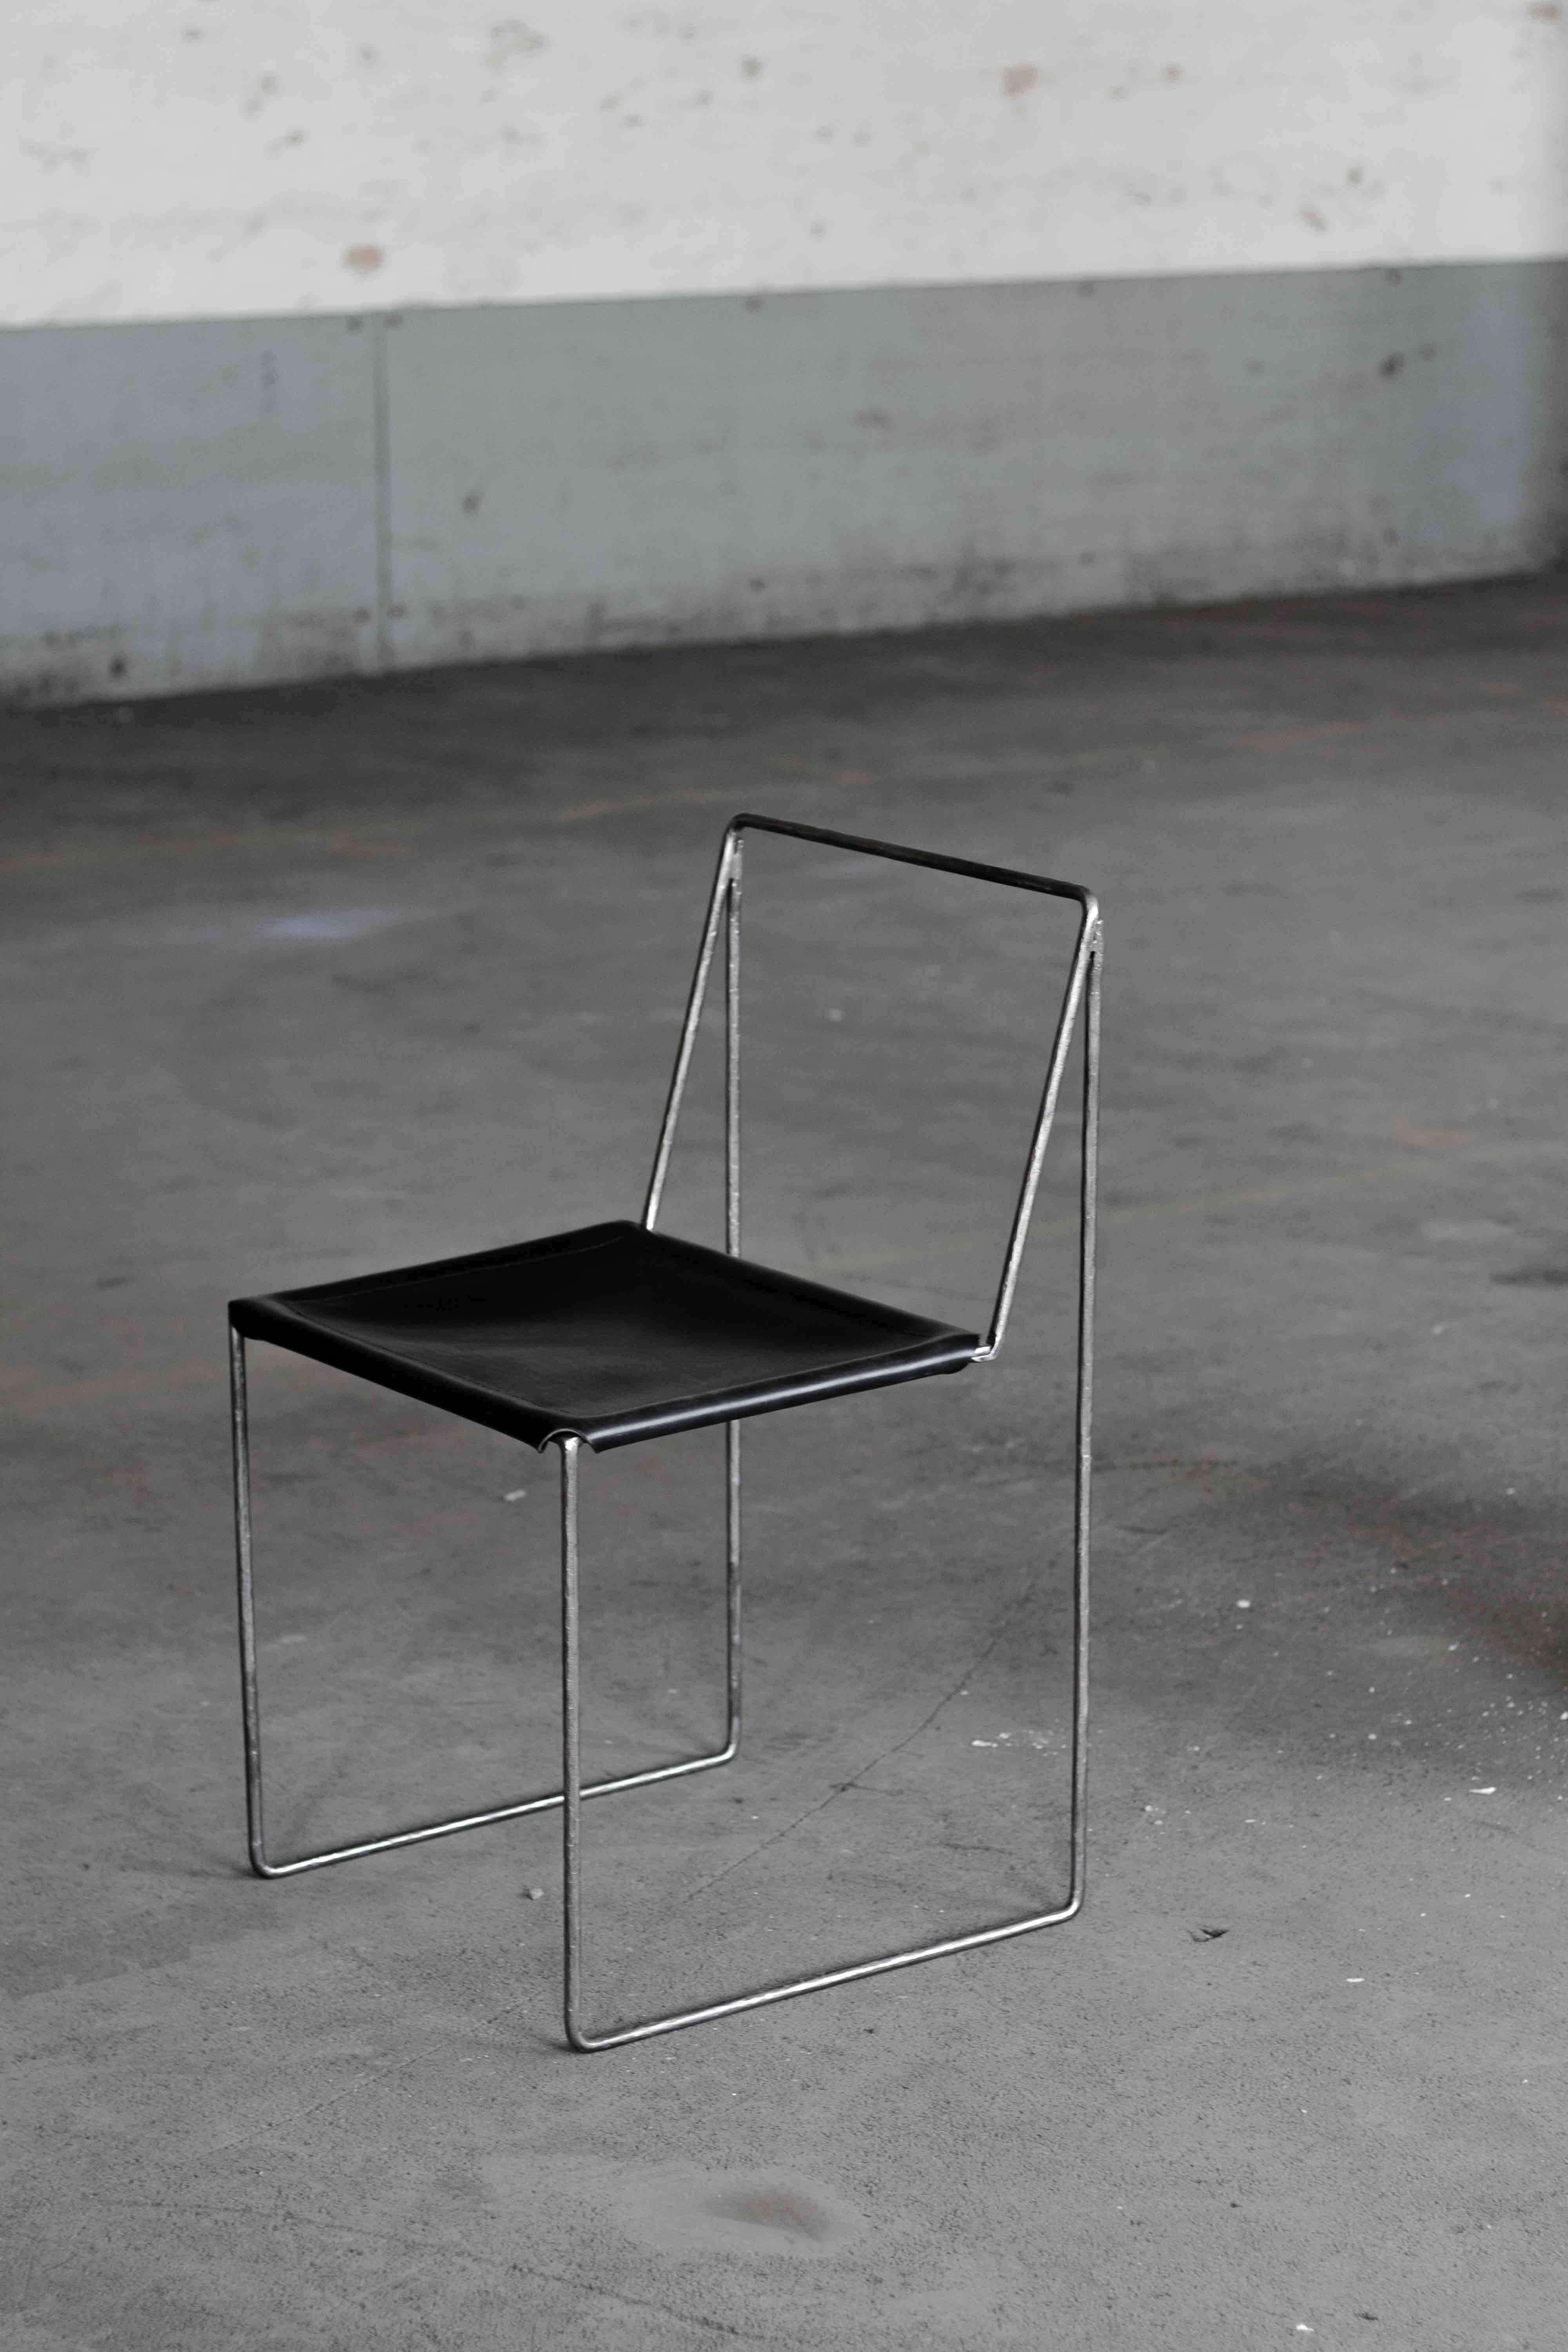 Stal chair by Lucas Tyra Morten
2018
Limited Edition of 48
Dimensions: W 47, H 80, D 47 cm
Material: Wrought iron and leather

With the quest to create the maximum minimal chair that sticks to both function and duration, stål chair came to life.